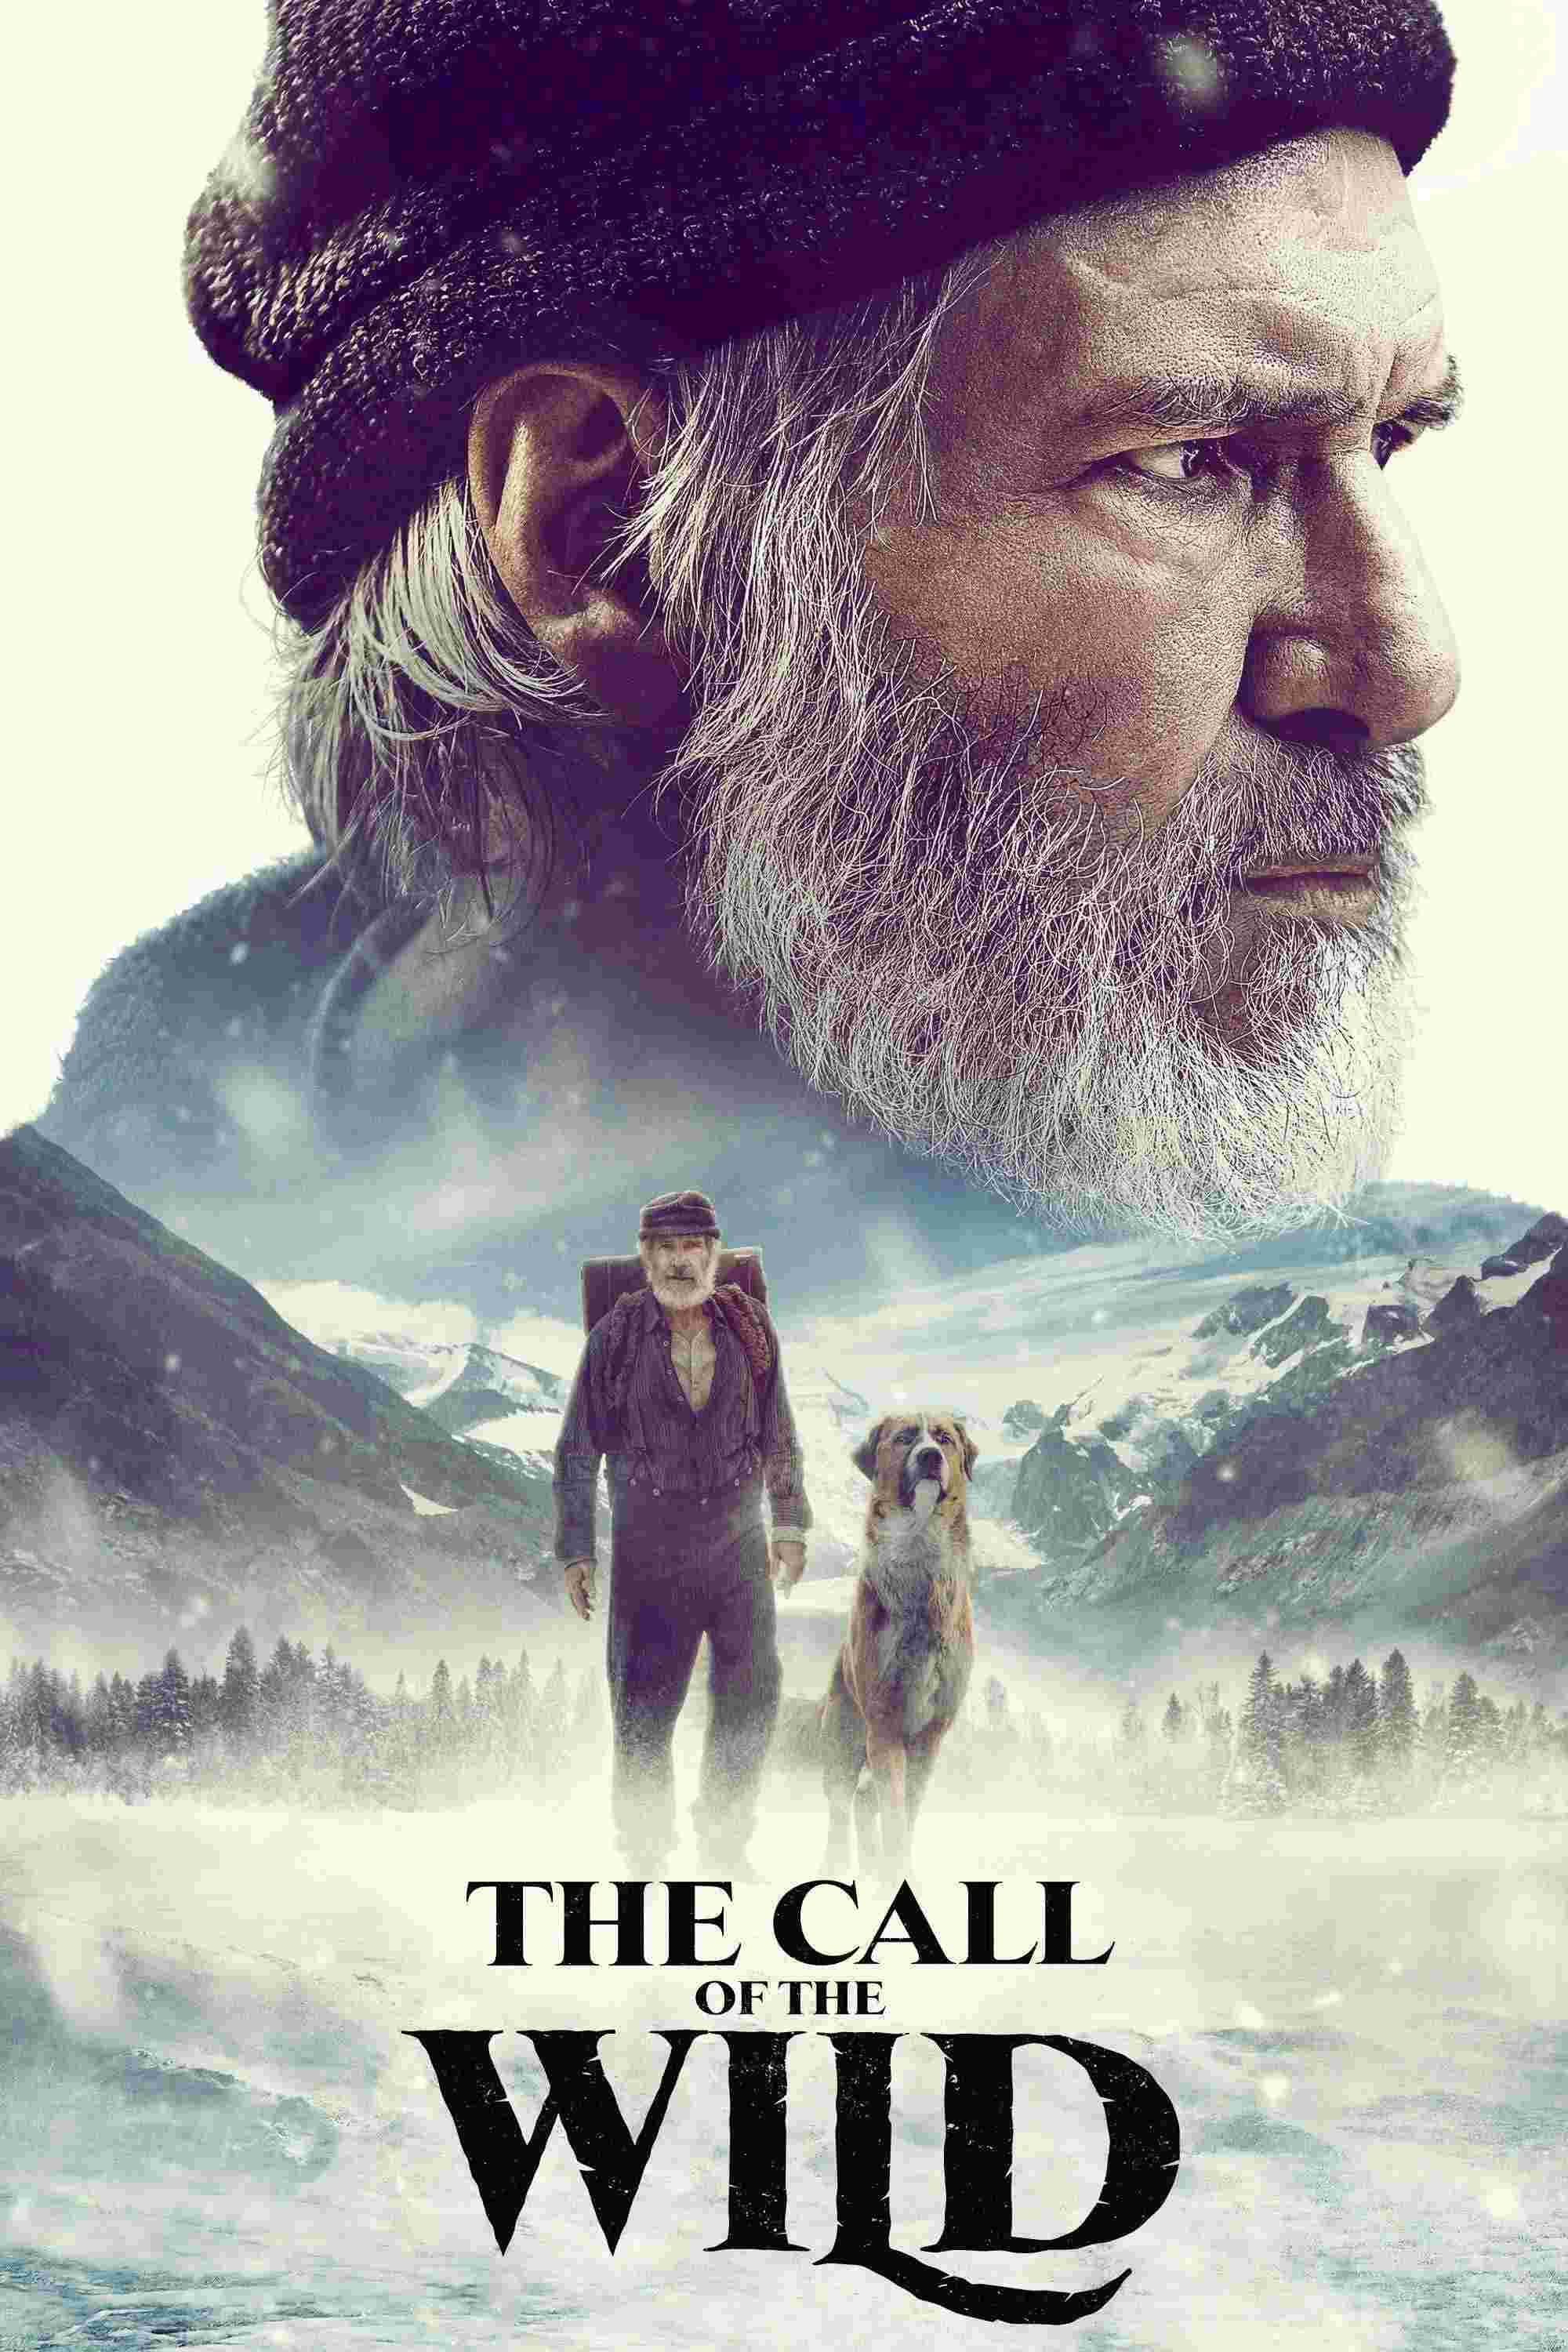 The Call of the Wild (2020) Harrison Ford